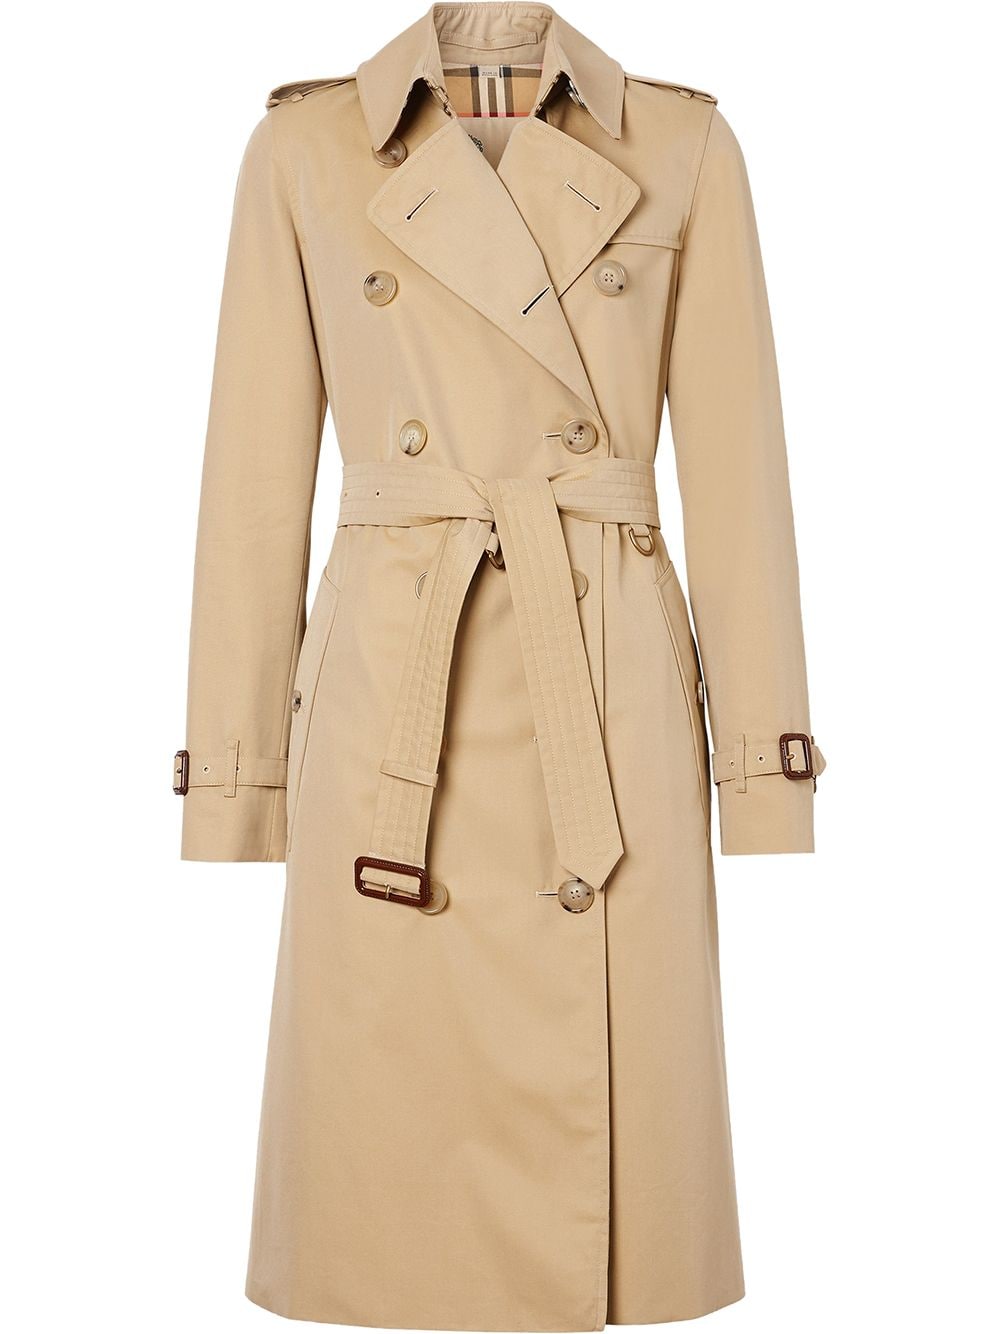 Burberry Kensignton Heritage double-breasted trench coat - Neutrals von Burberry